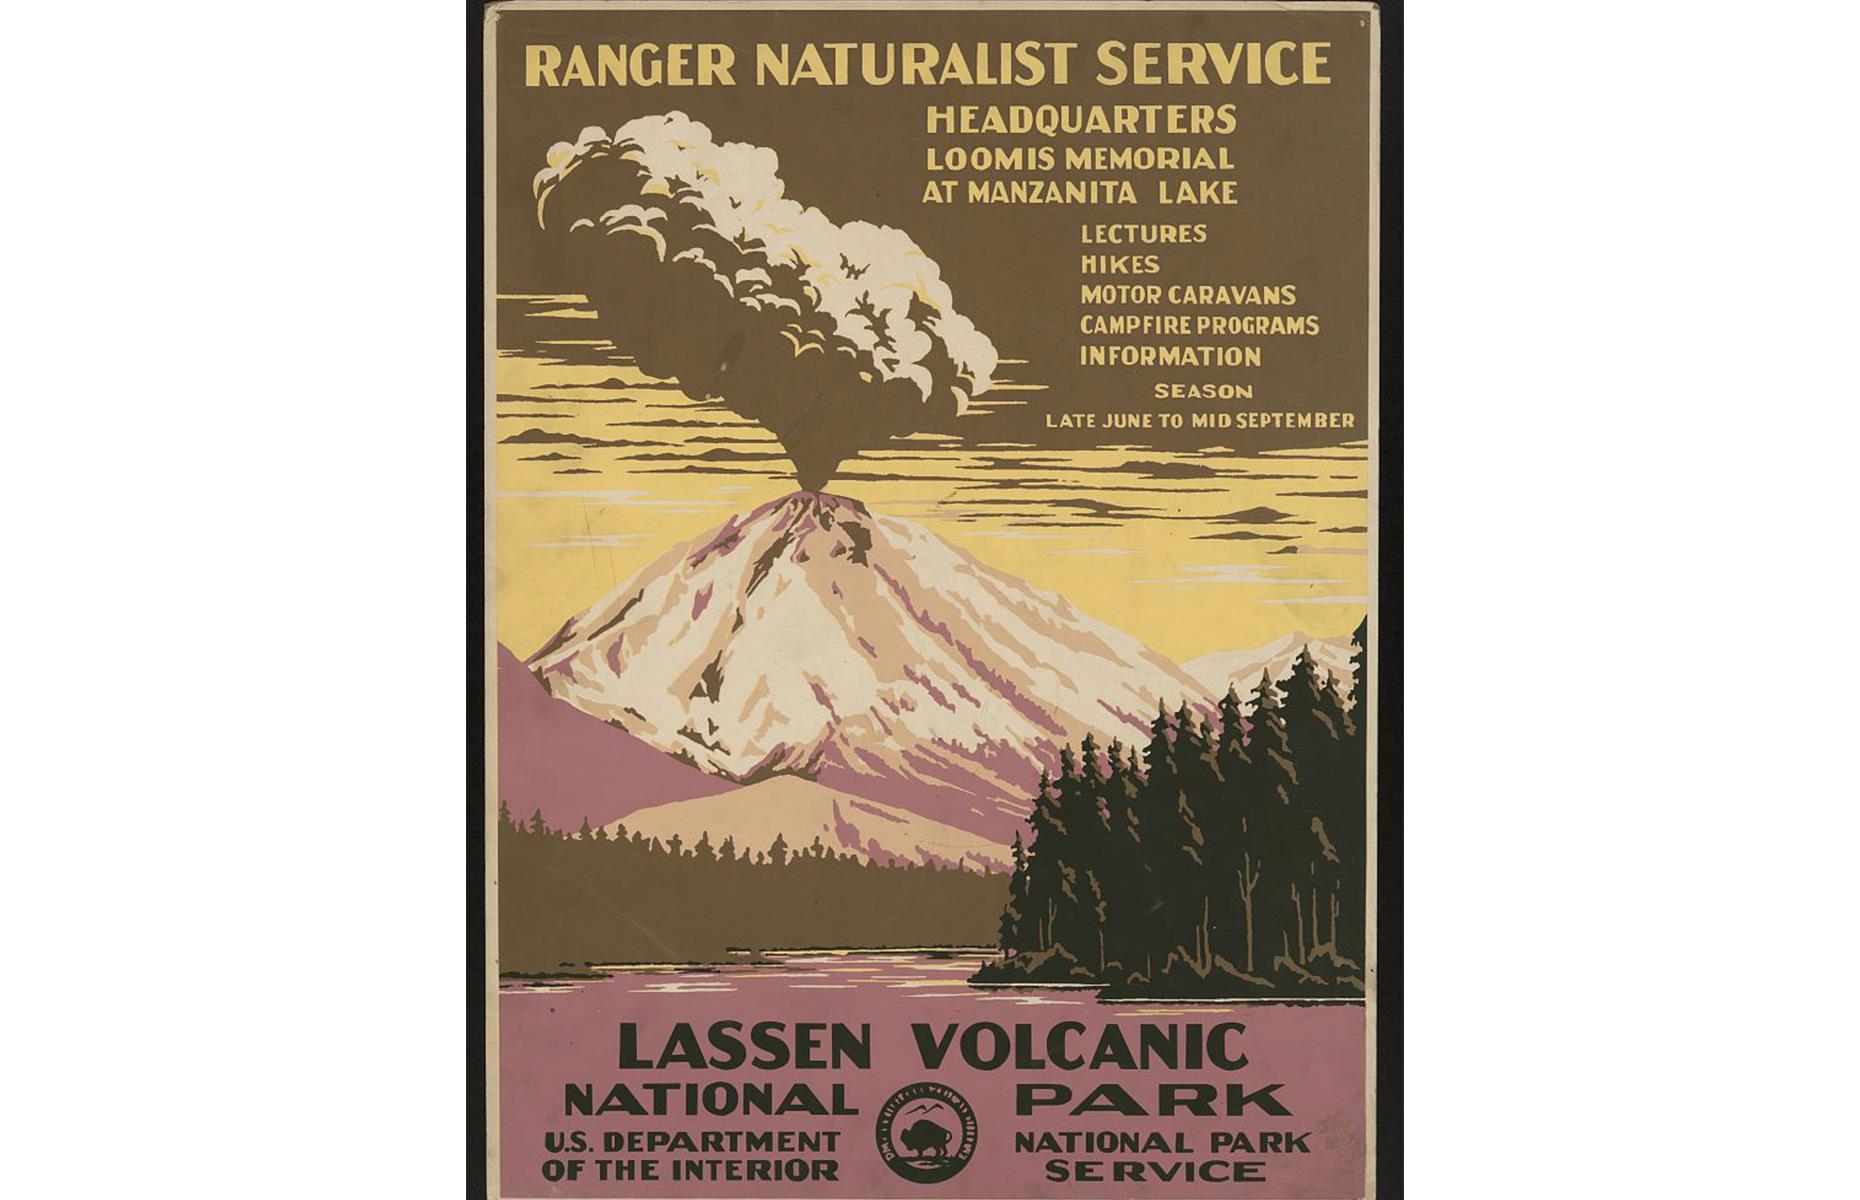 From one volcanic wonderland to another: this US Department of the Interior advert promotes the bubbling expanse of Lassen Volcanic National Park in California. The focal point is Lassen Peak, which can be seen erupting in the background, fronted by fir trees and a still lake. The ad promotes hikes, lectures and campfire programs in the park too.